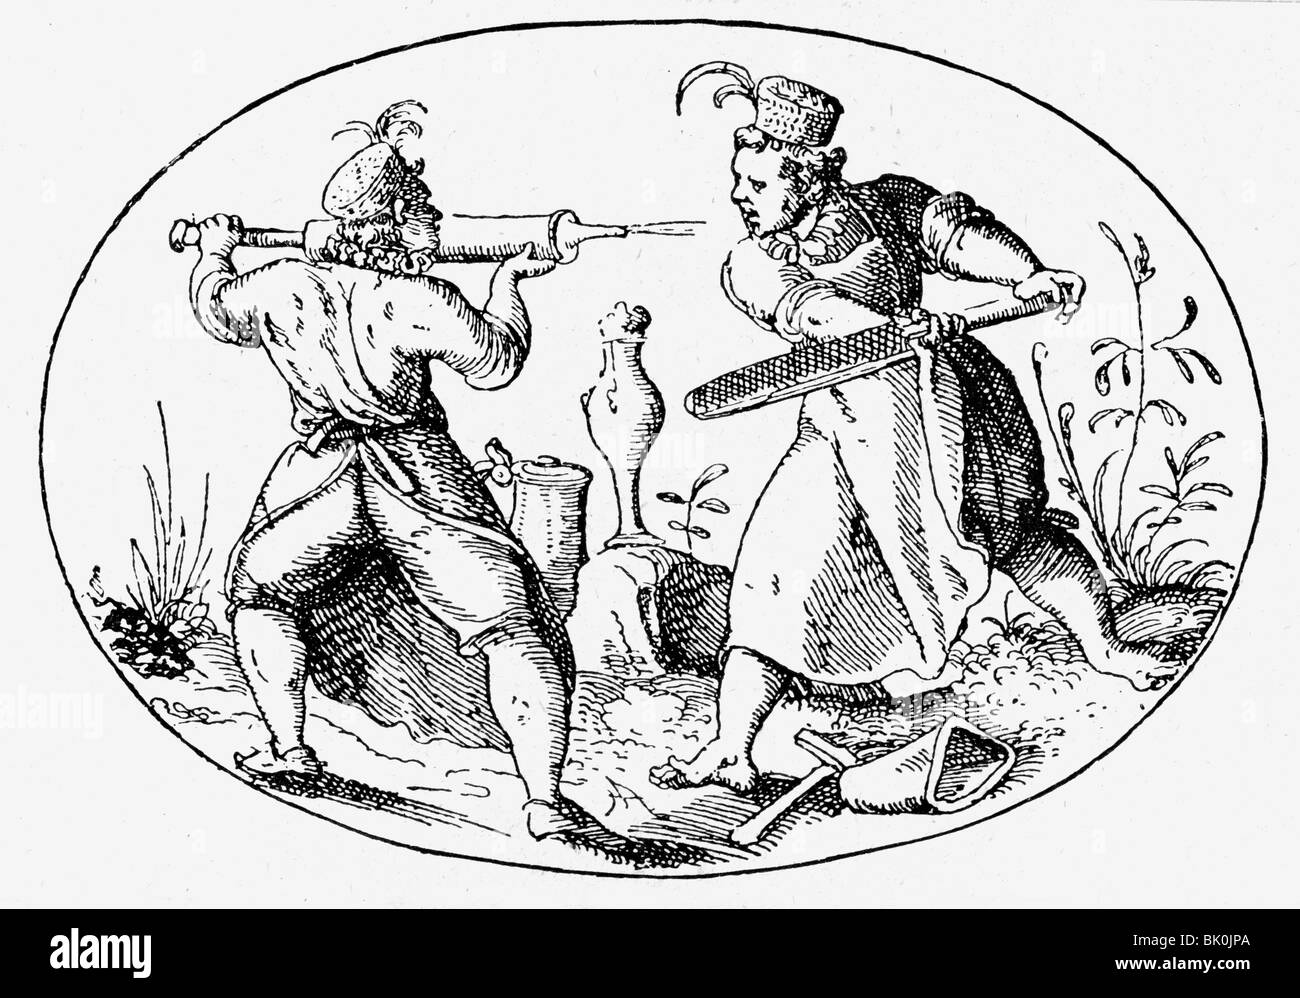 handcraft, craftsmen, caricature, dispute of rank between a whitesmith fellow and a filemaker fellow, woodcut, 16th century, craftsman, people, professions, smith, quarrel, fellows, file, syringe, historic, historical, Stock Photo